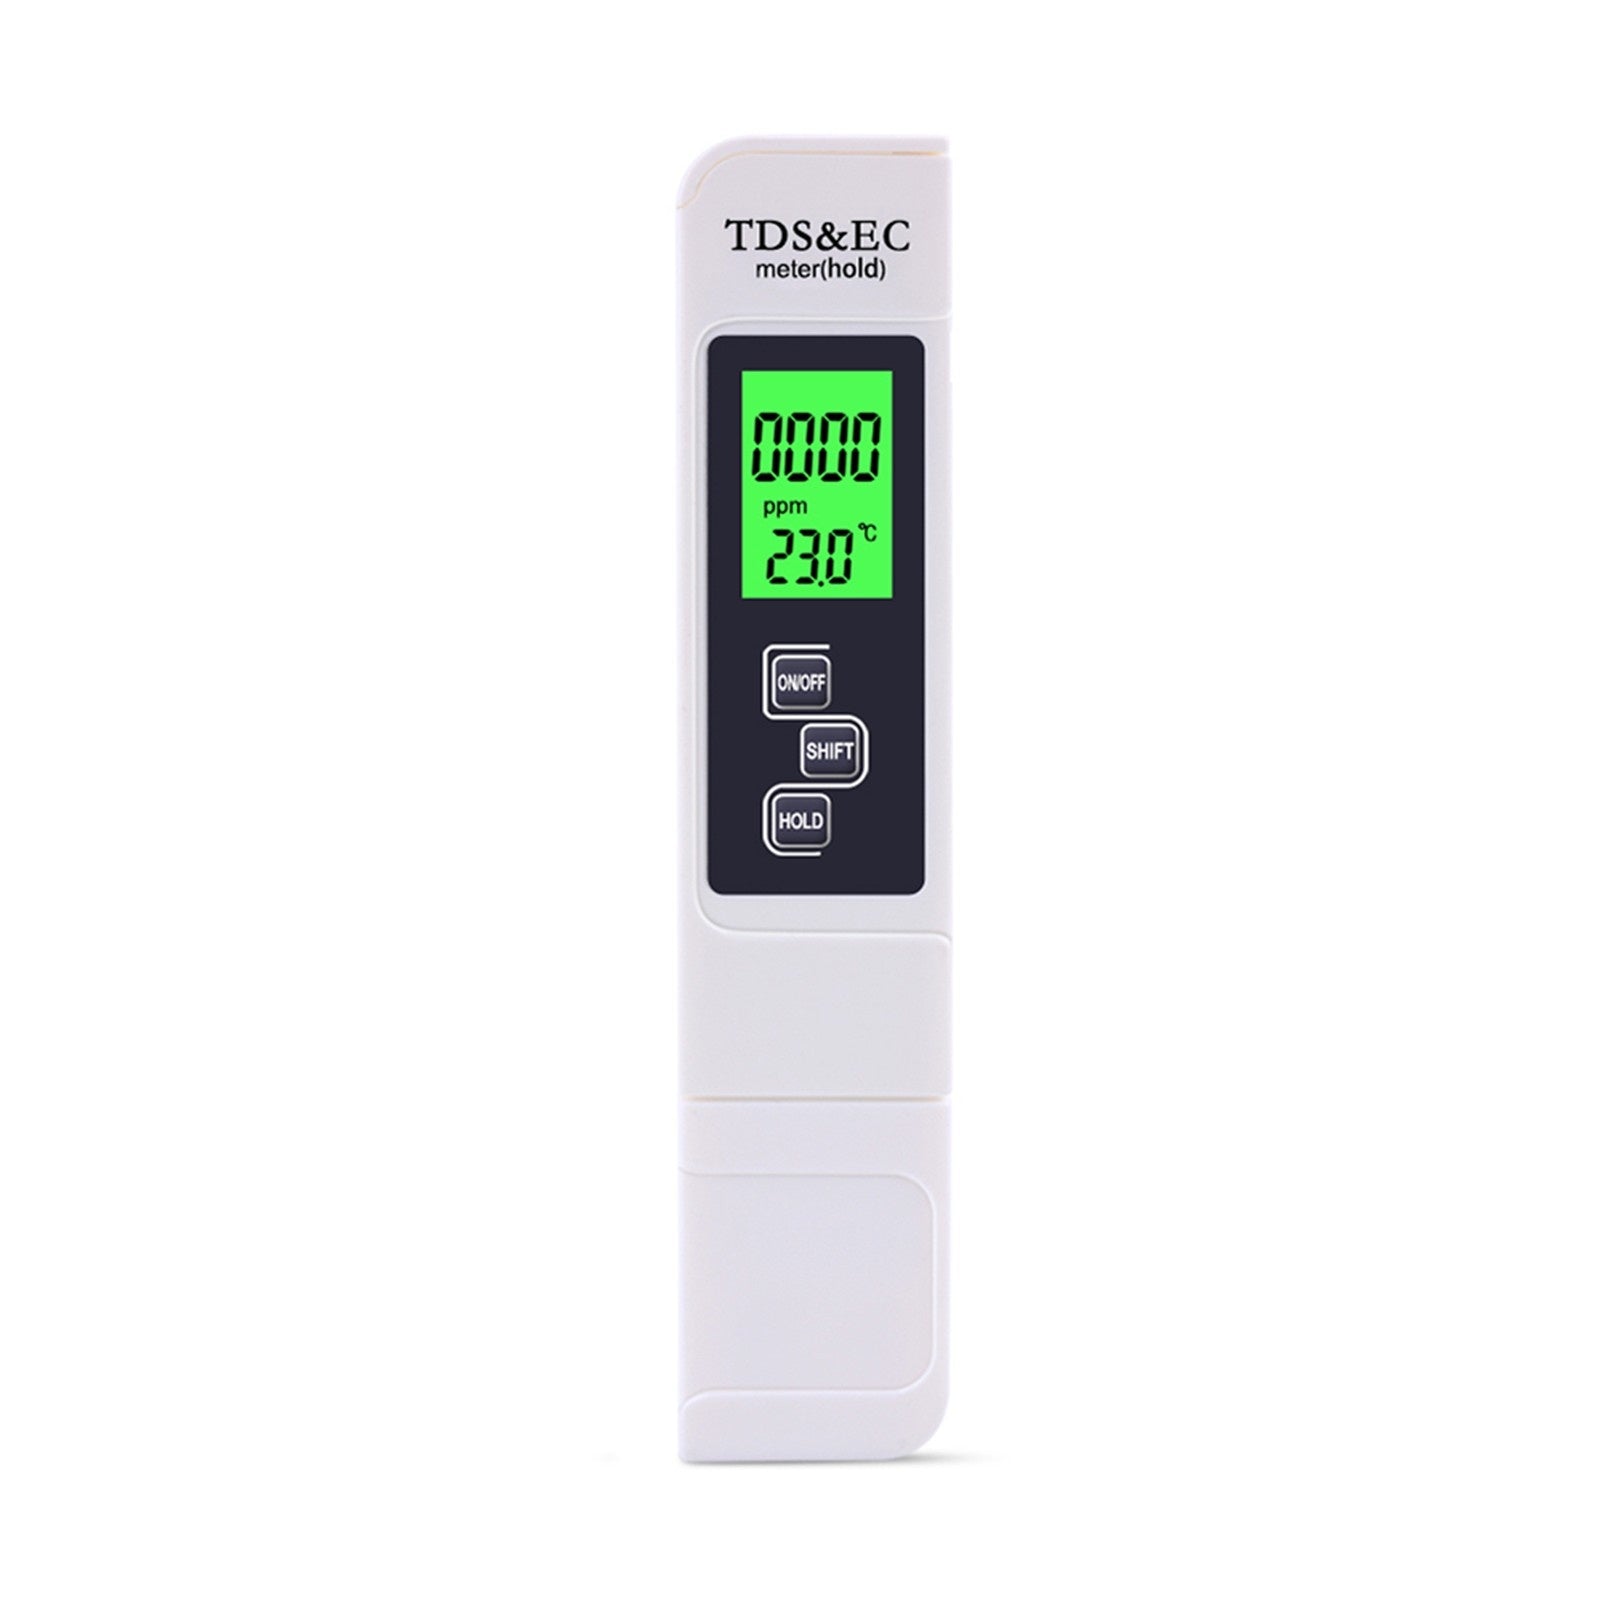 3-in-1 Multifunctional Water Quality Detector Portable Professional TDS Pen Tester EC Meter Accurate Water Quality Measurement Tool